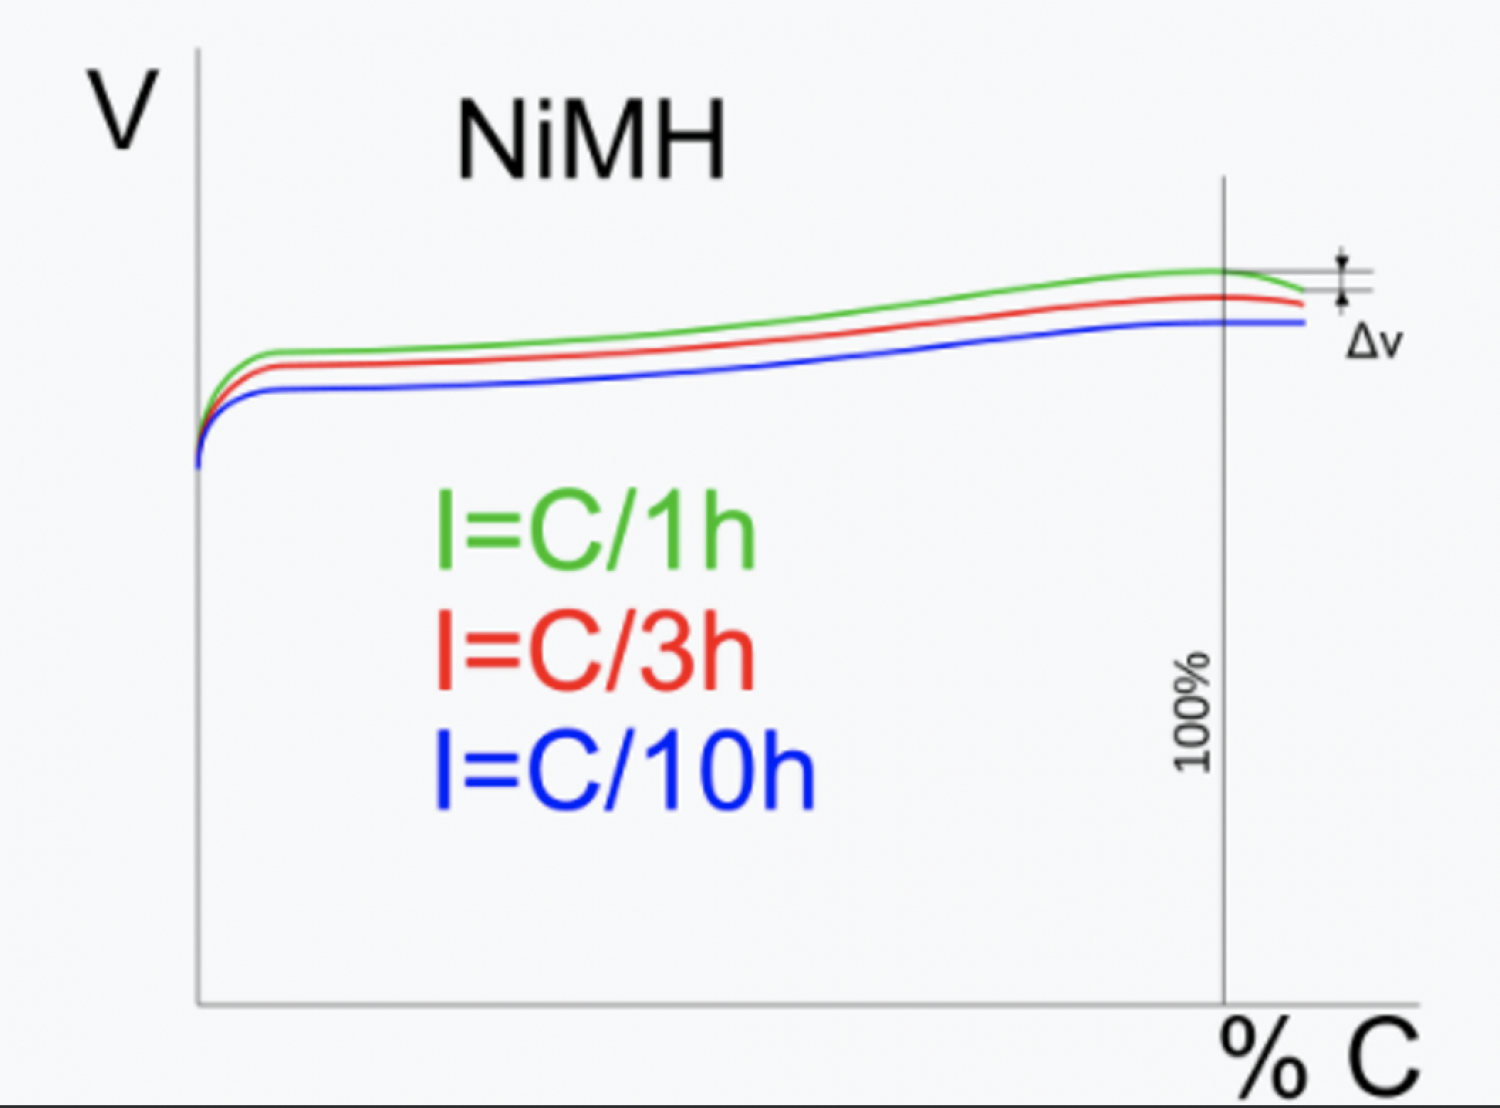 The relationship between the state of charge and the voltage during NiMH charging